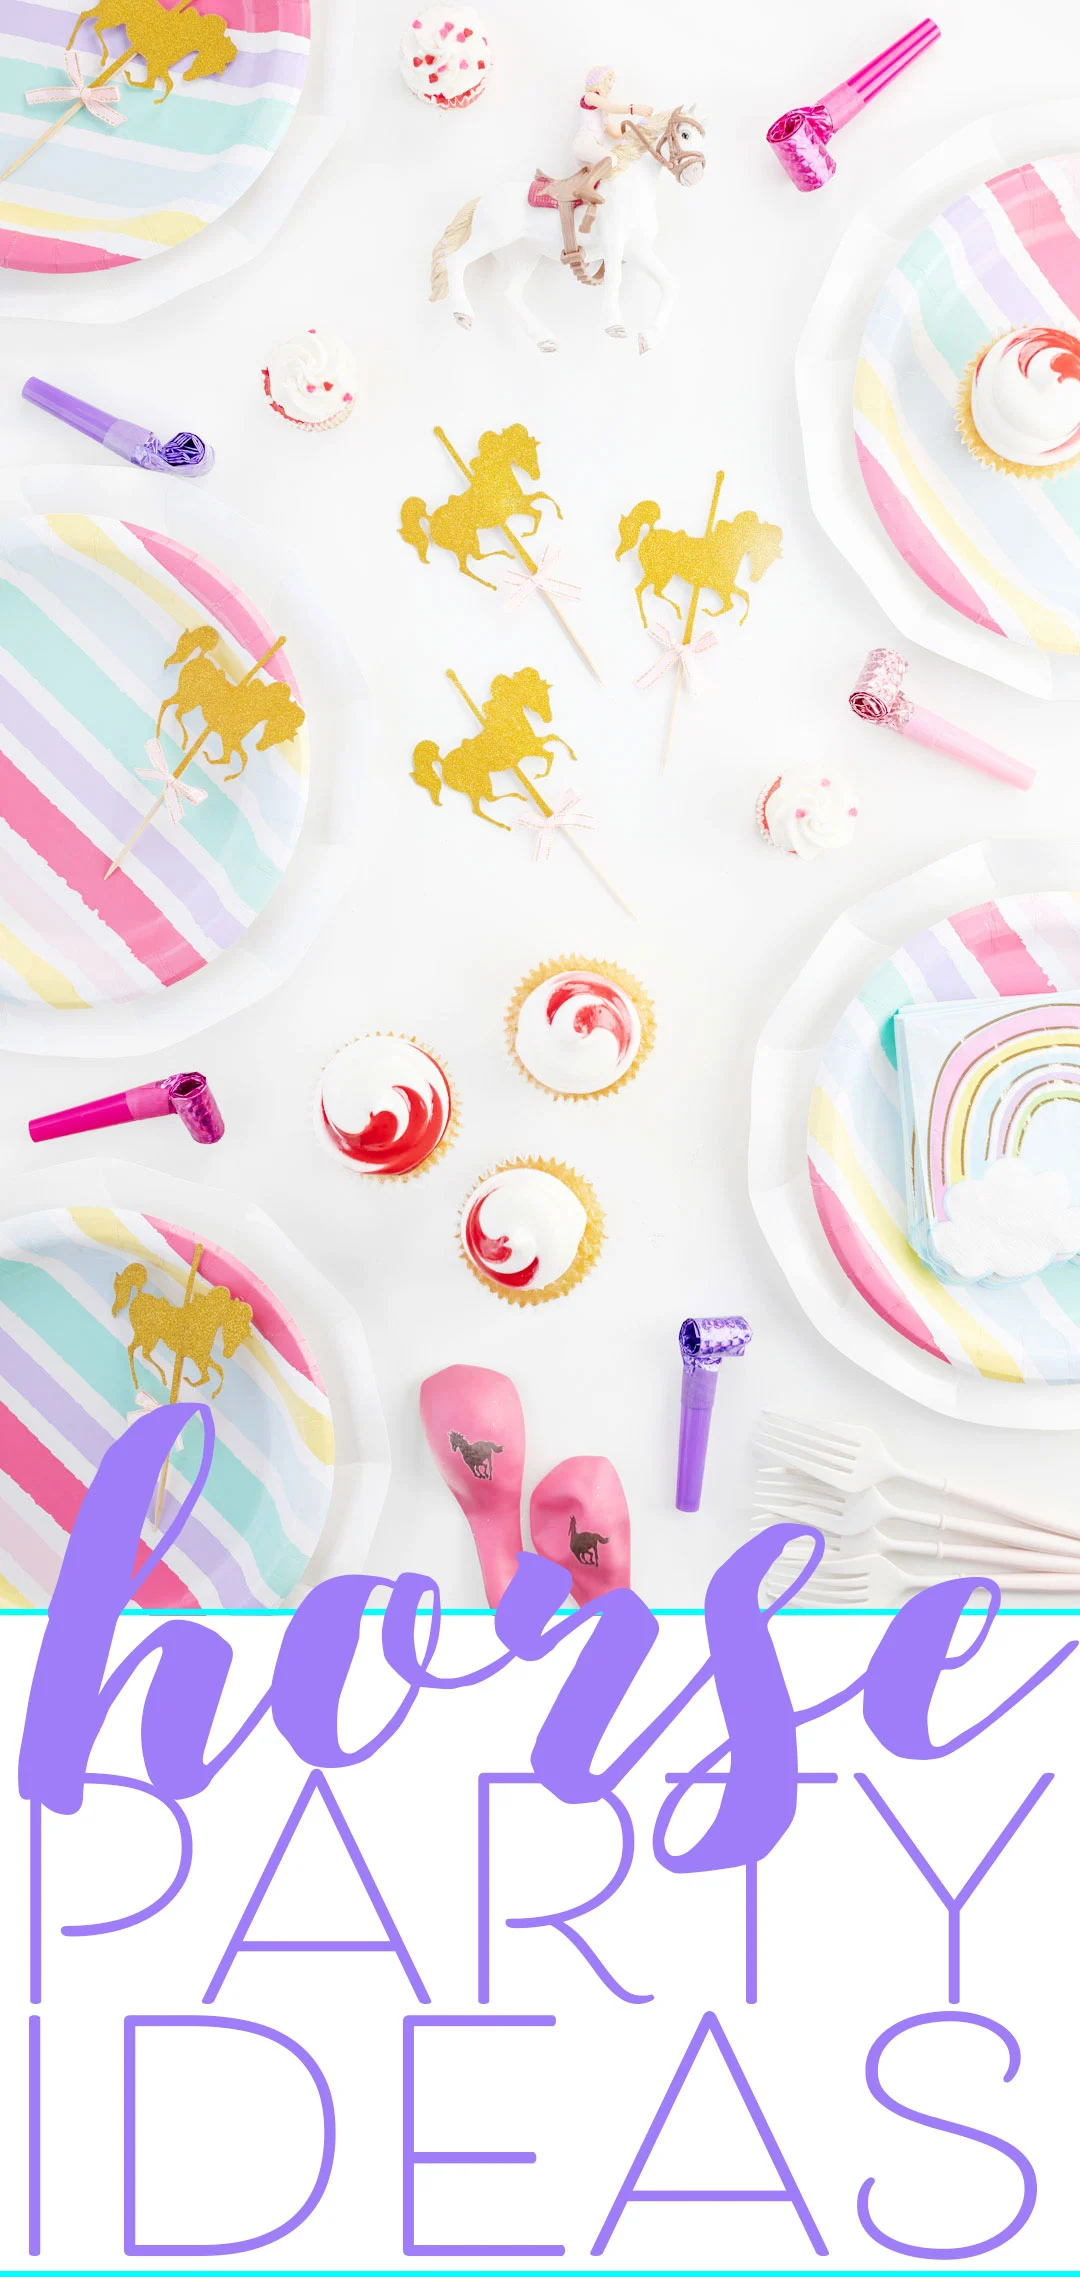 Horse Party Ideas for Girls. Pink and Gold Horse Supplies and Best Horse Birthday Tips and Gift Ideas.